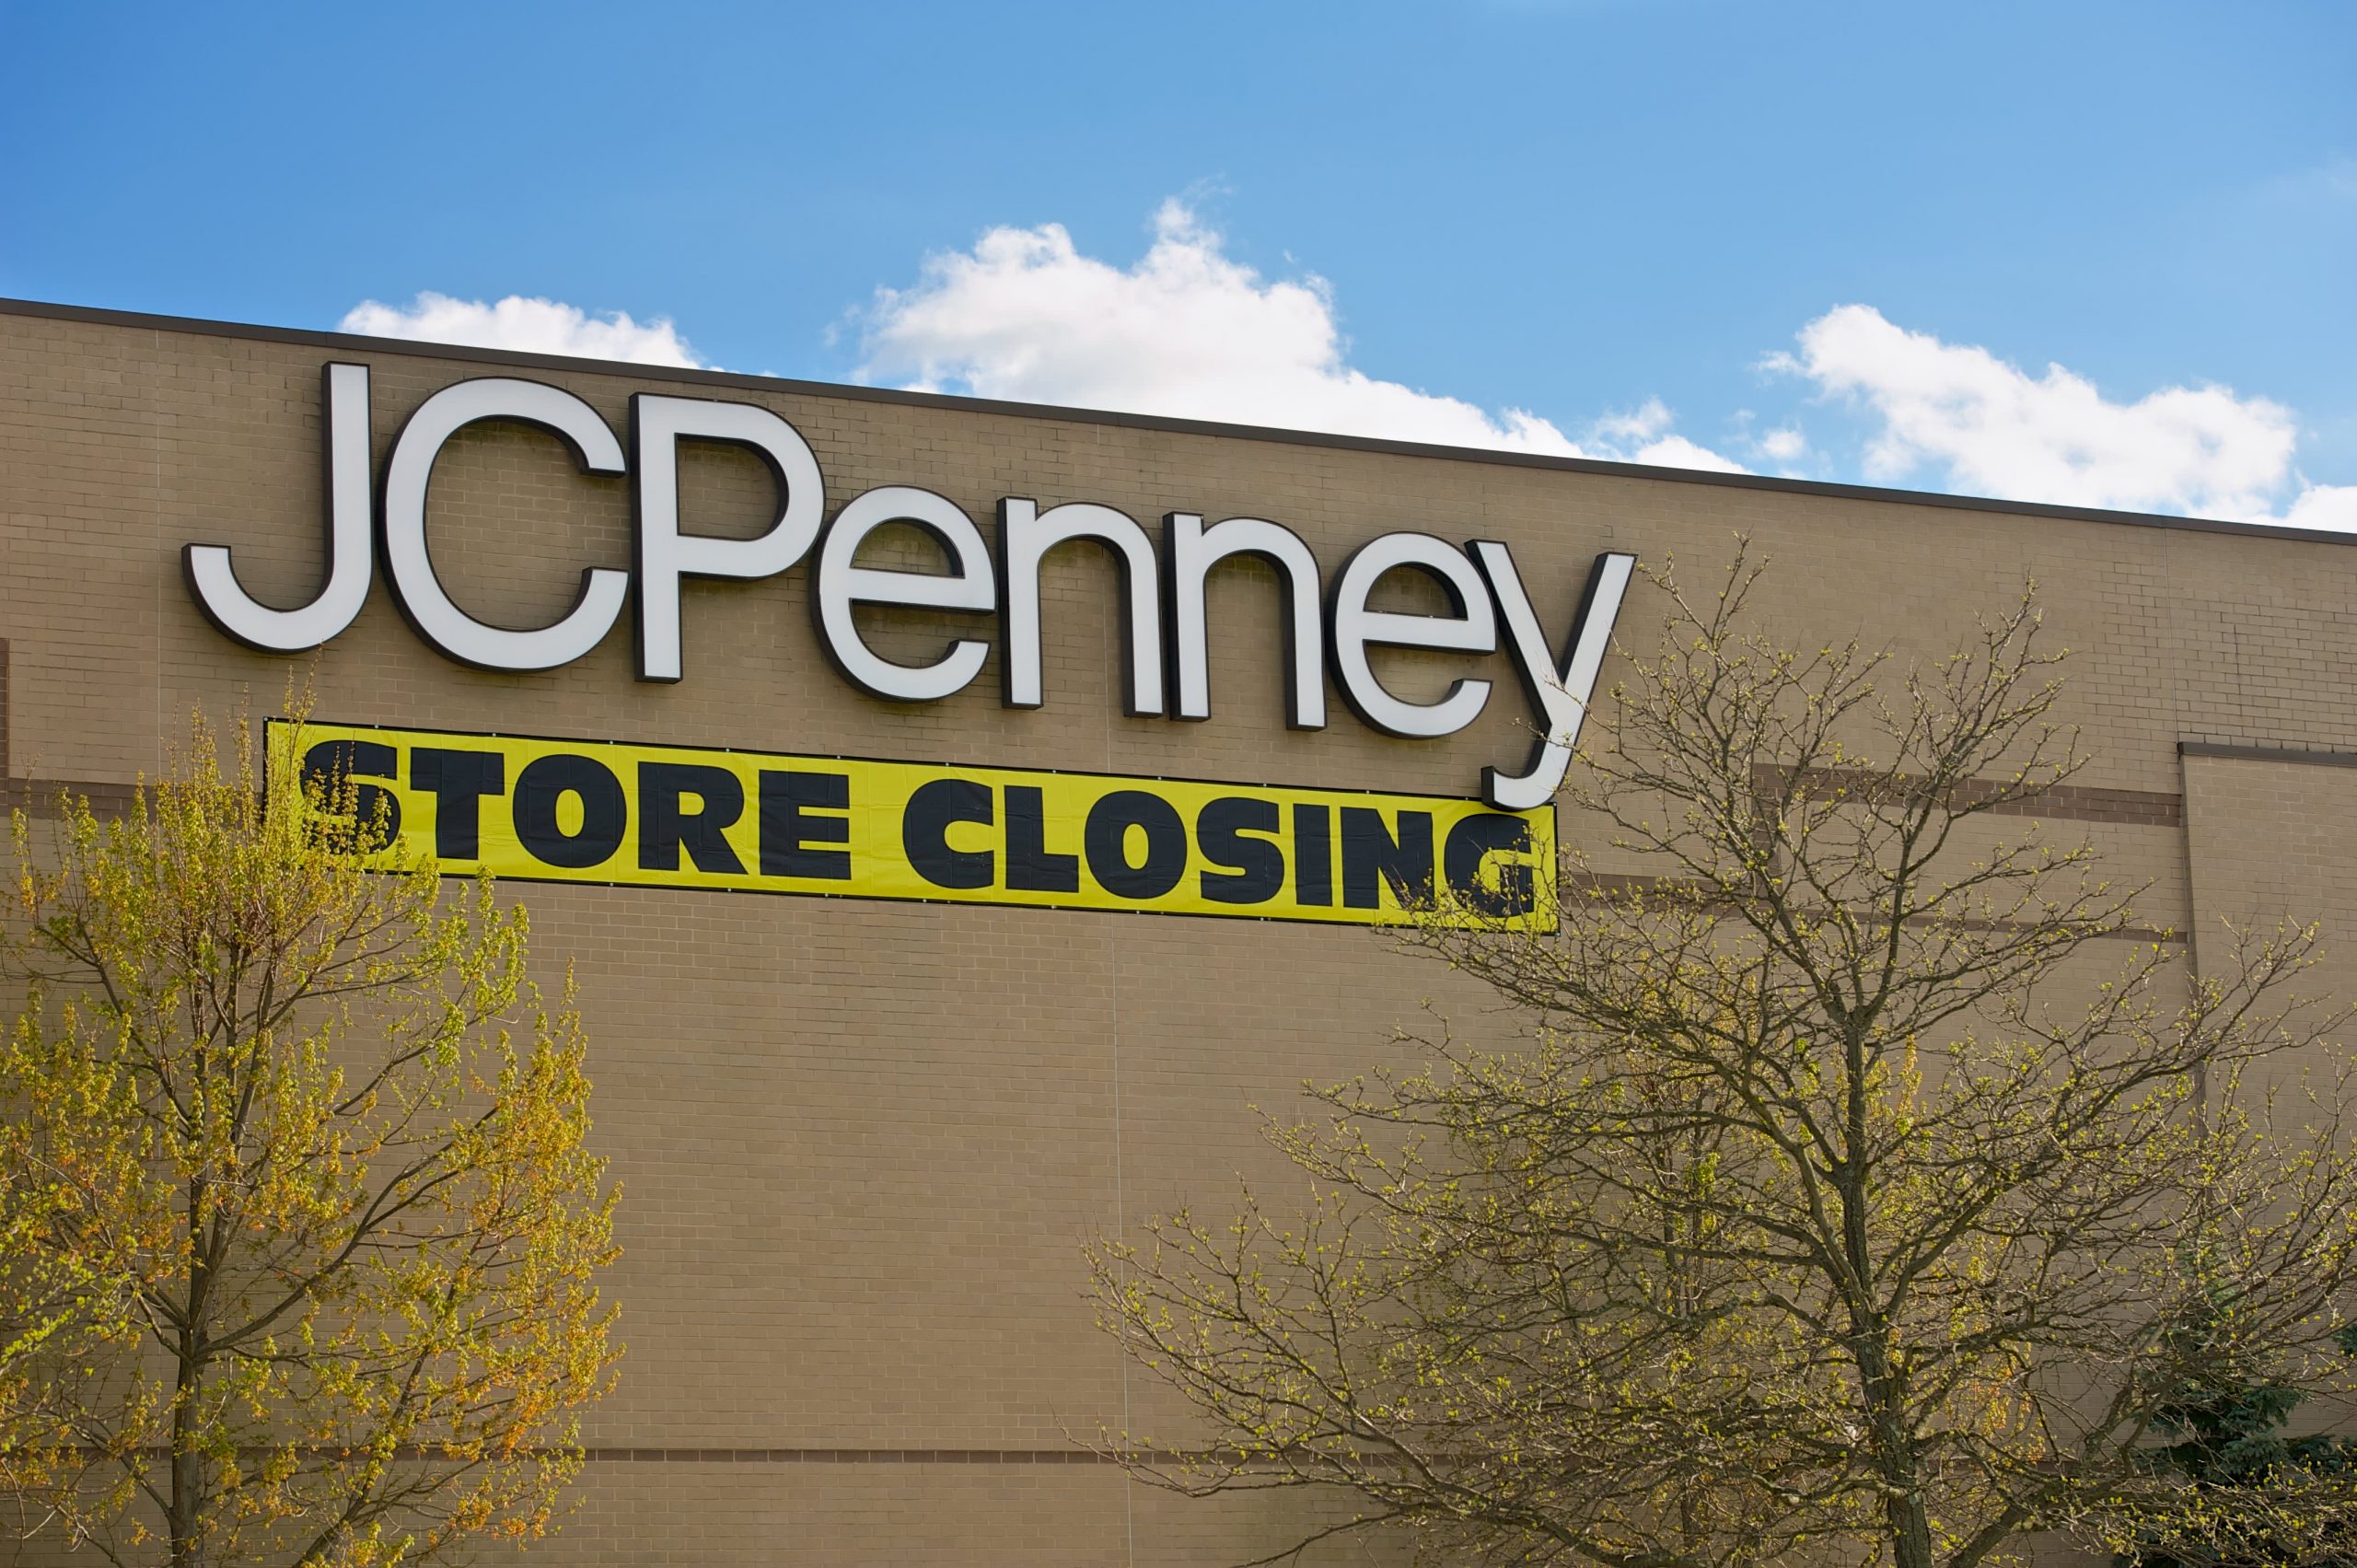 The 10 largest retail bankruptcies of 2020